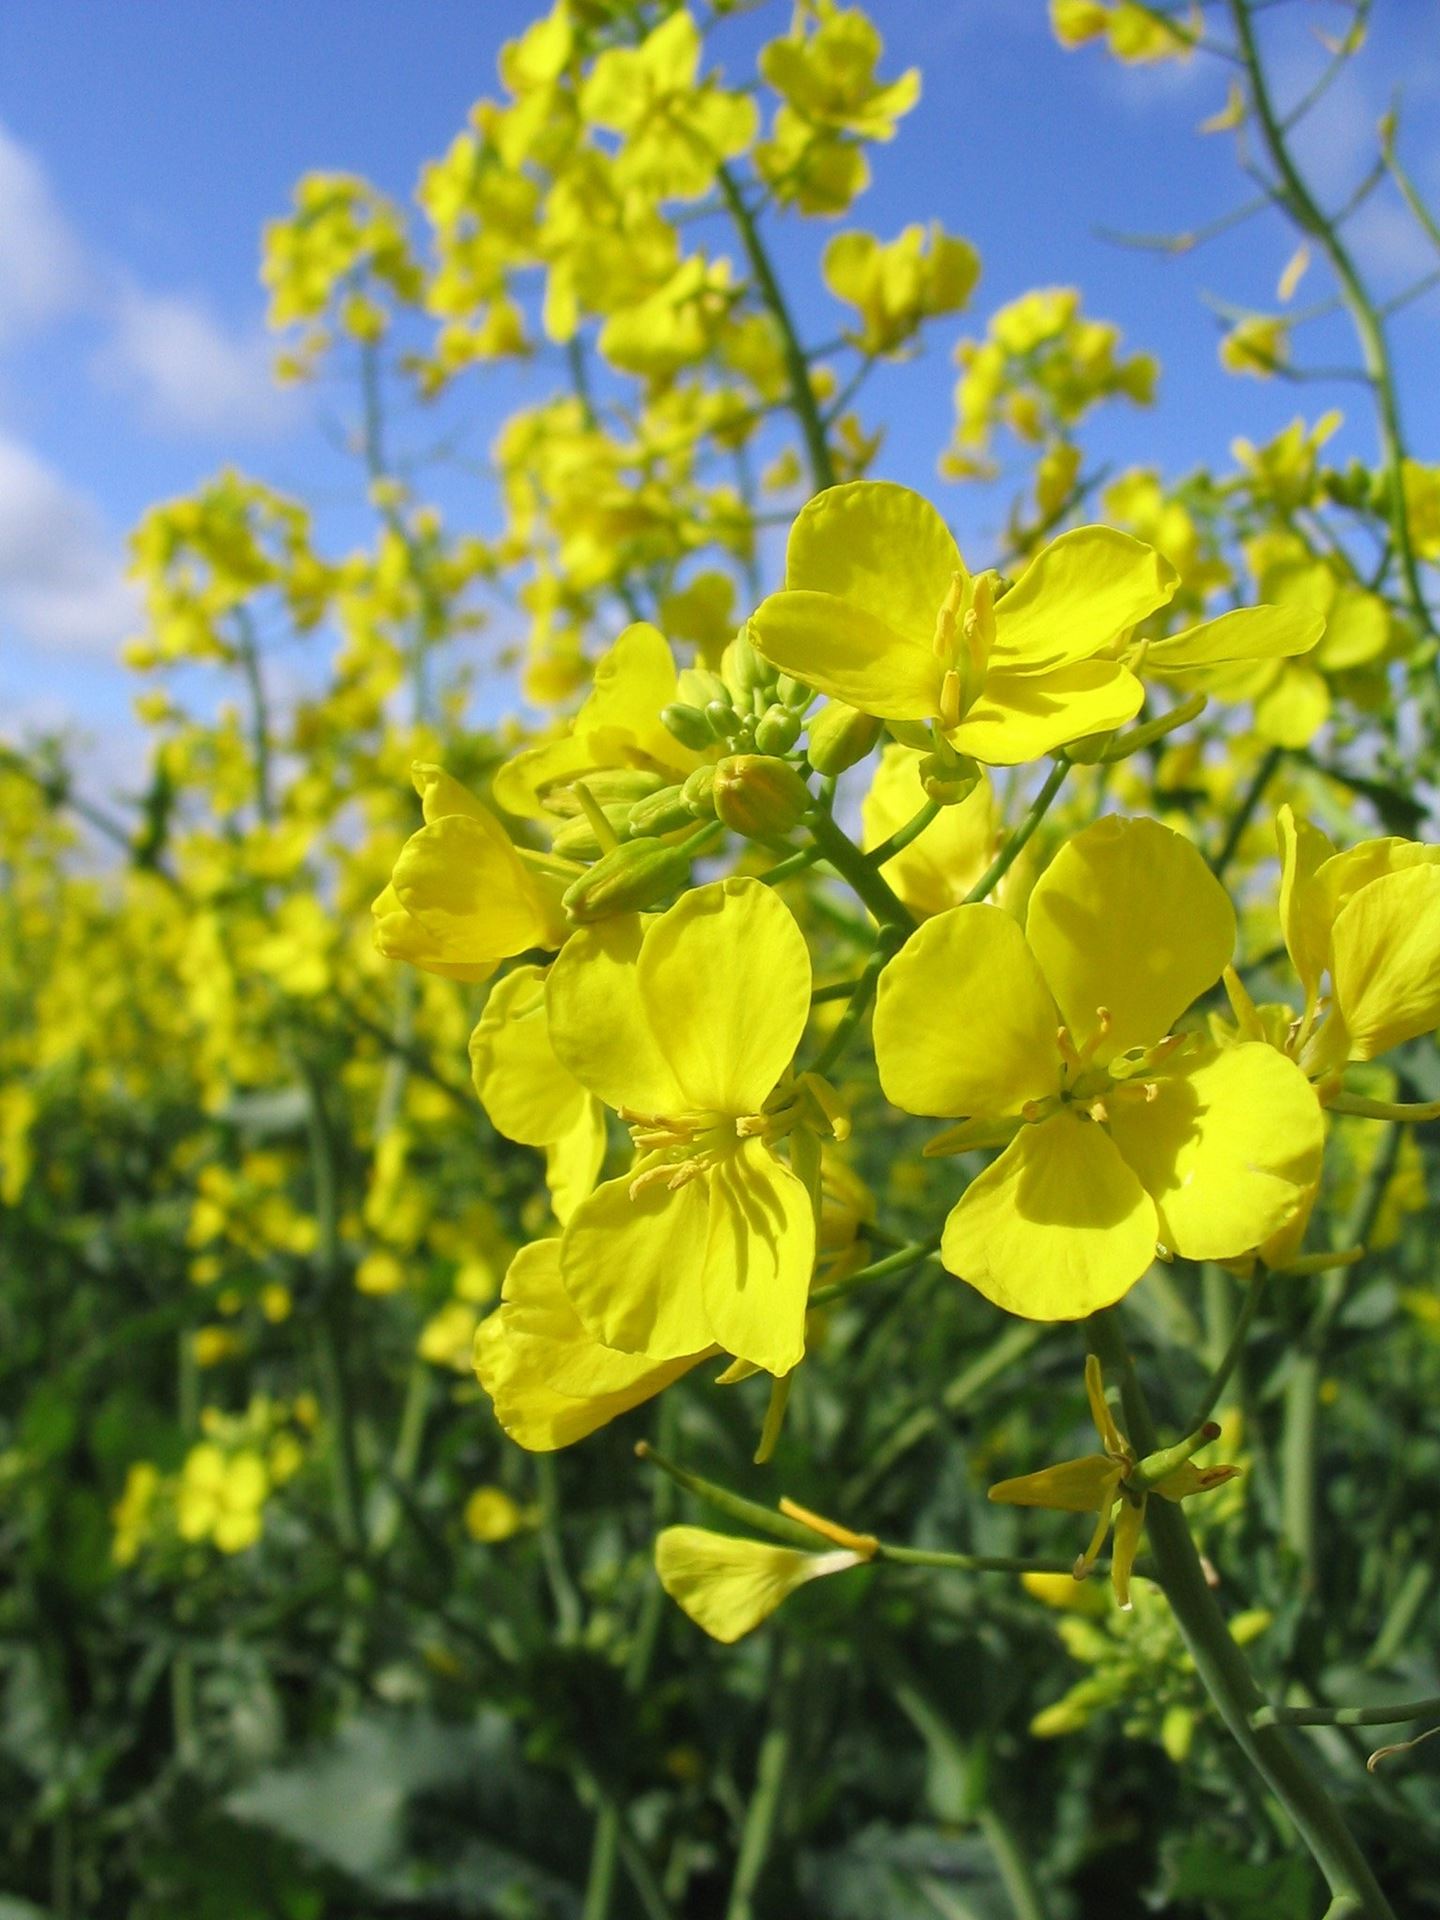 A close up shot of bright yellow flowering canola plants